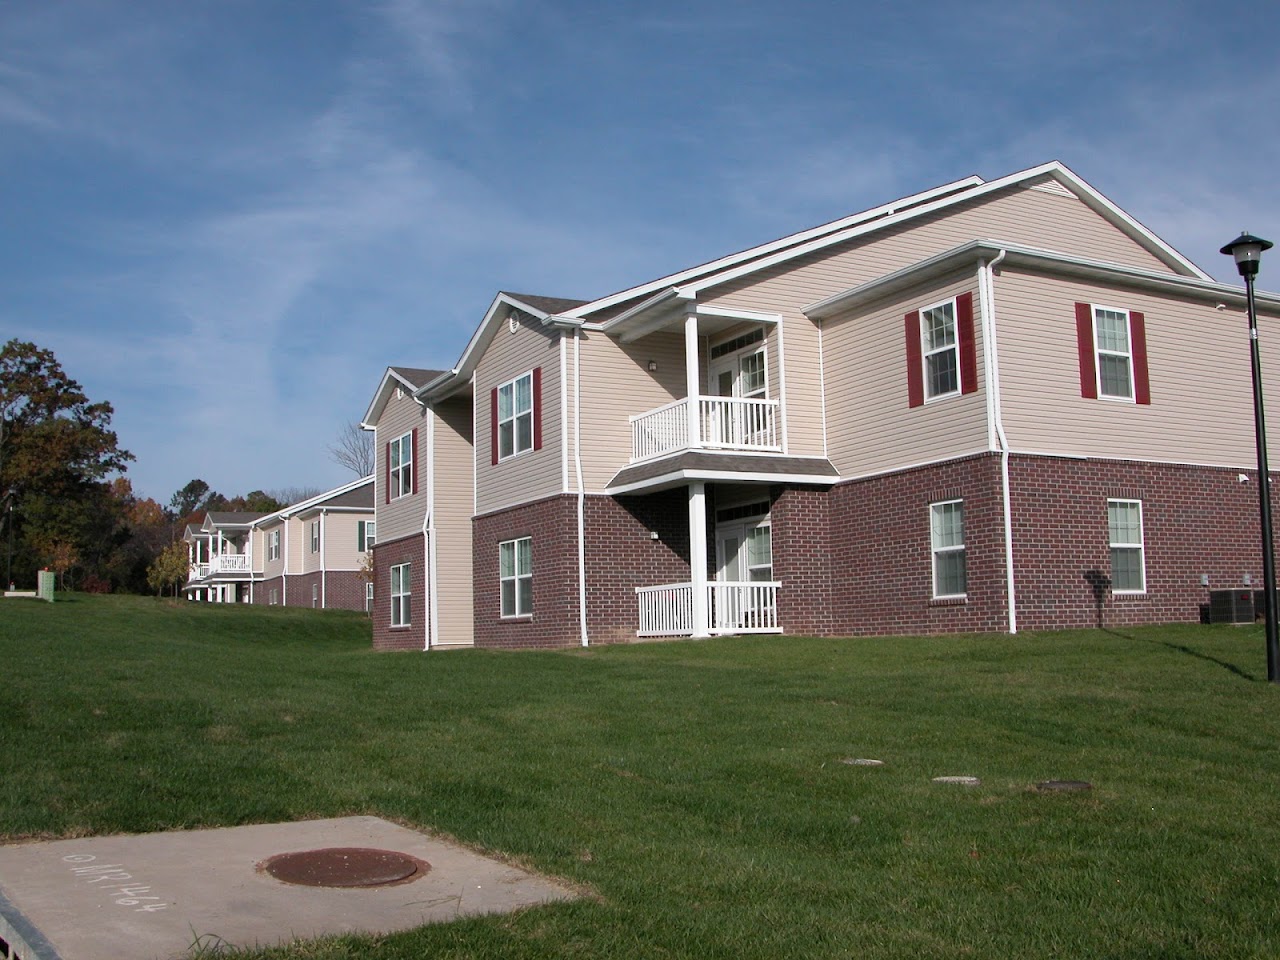 Photo of WEATHERED ROCK APTS. Affordable housing located at 835 WEATHERED ROCK RD JEFFERSON CITY, MO 65101